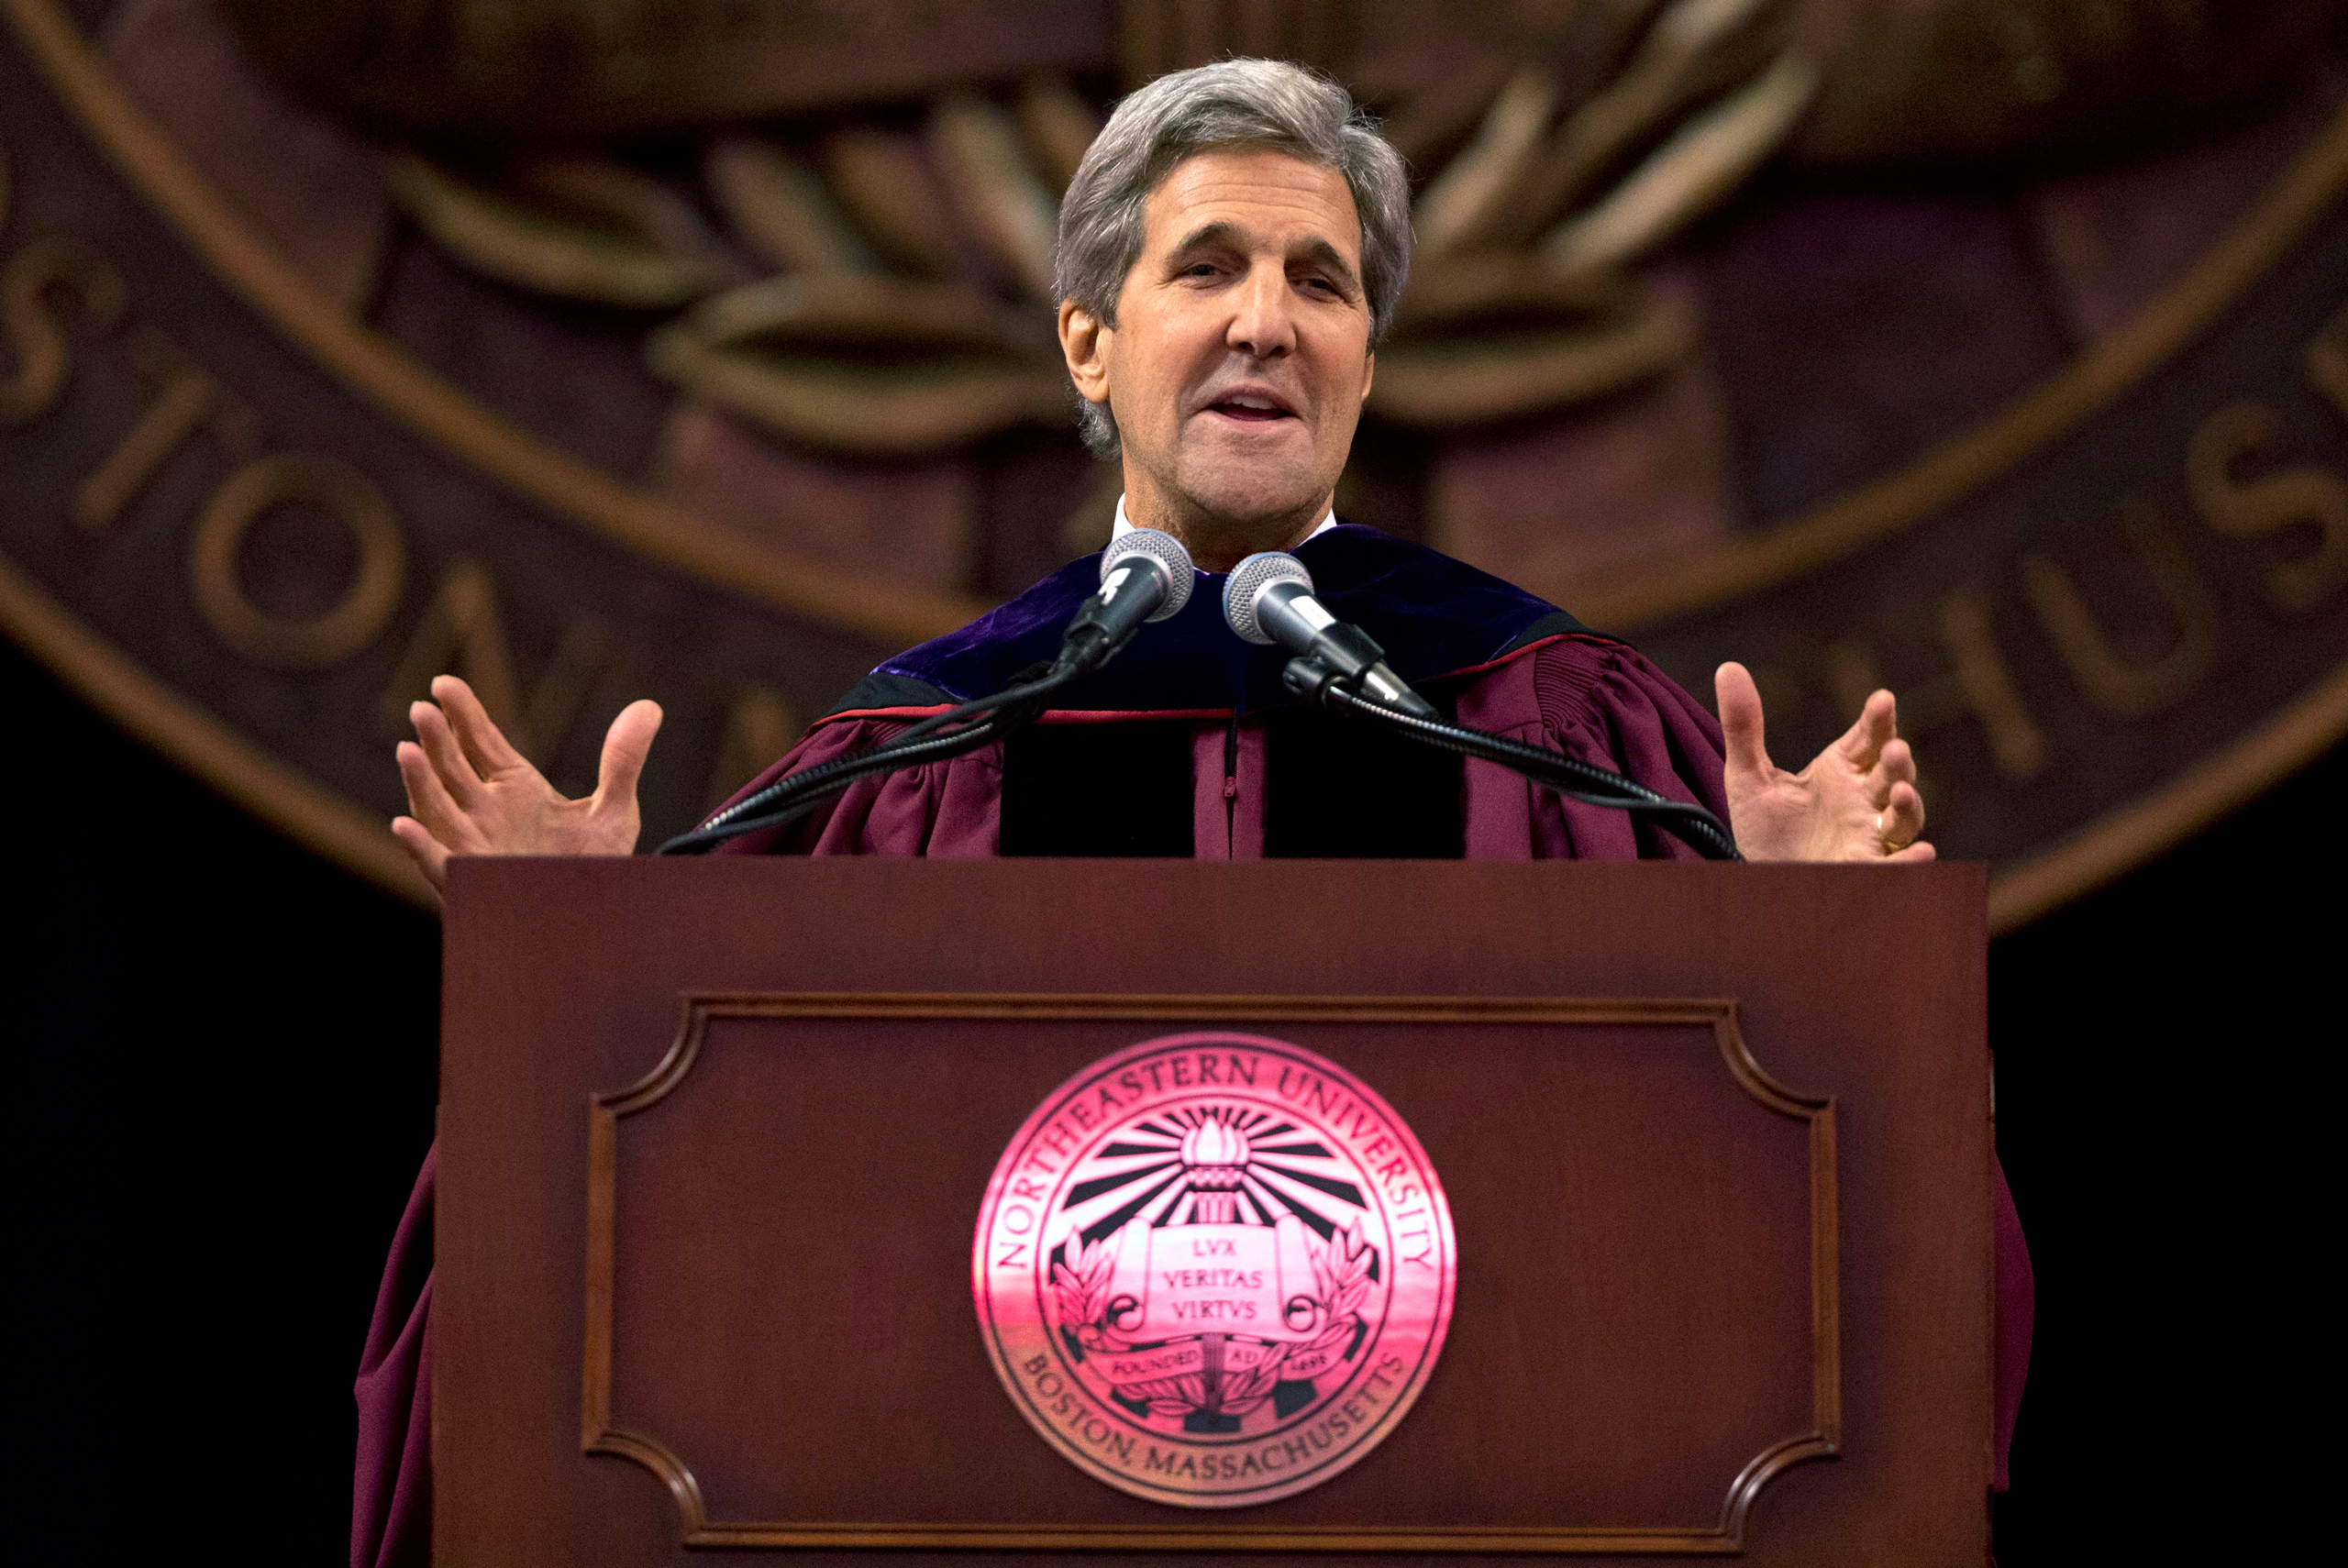 Secretary of State John Kerry gestures while giving the keynote address during Northeastern University's commencement ceremonies in Boston, Friday, May 6, 2016. Kerry told the graduating class that their diversity makes them "Donald Trump's worst nightmare." (AP Photo/Michael Dwyer)